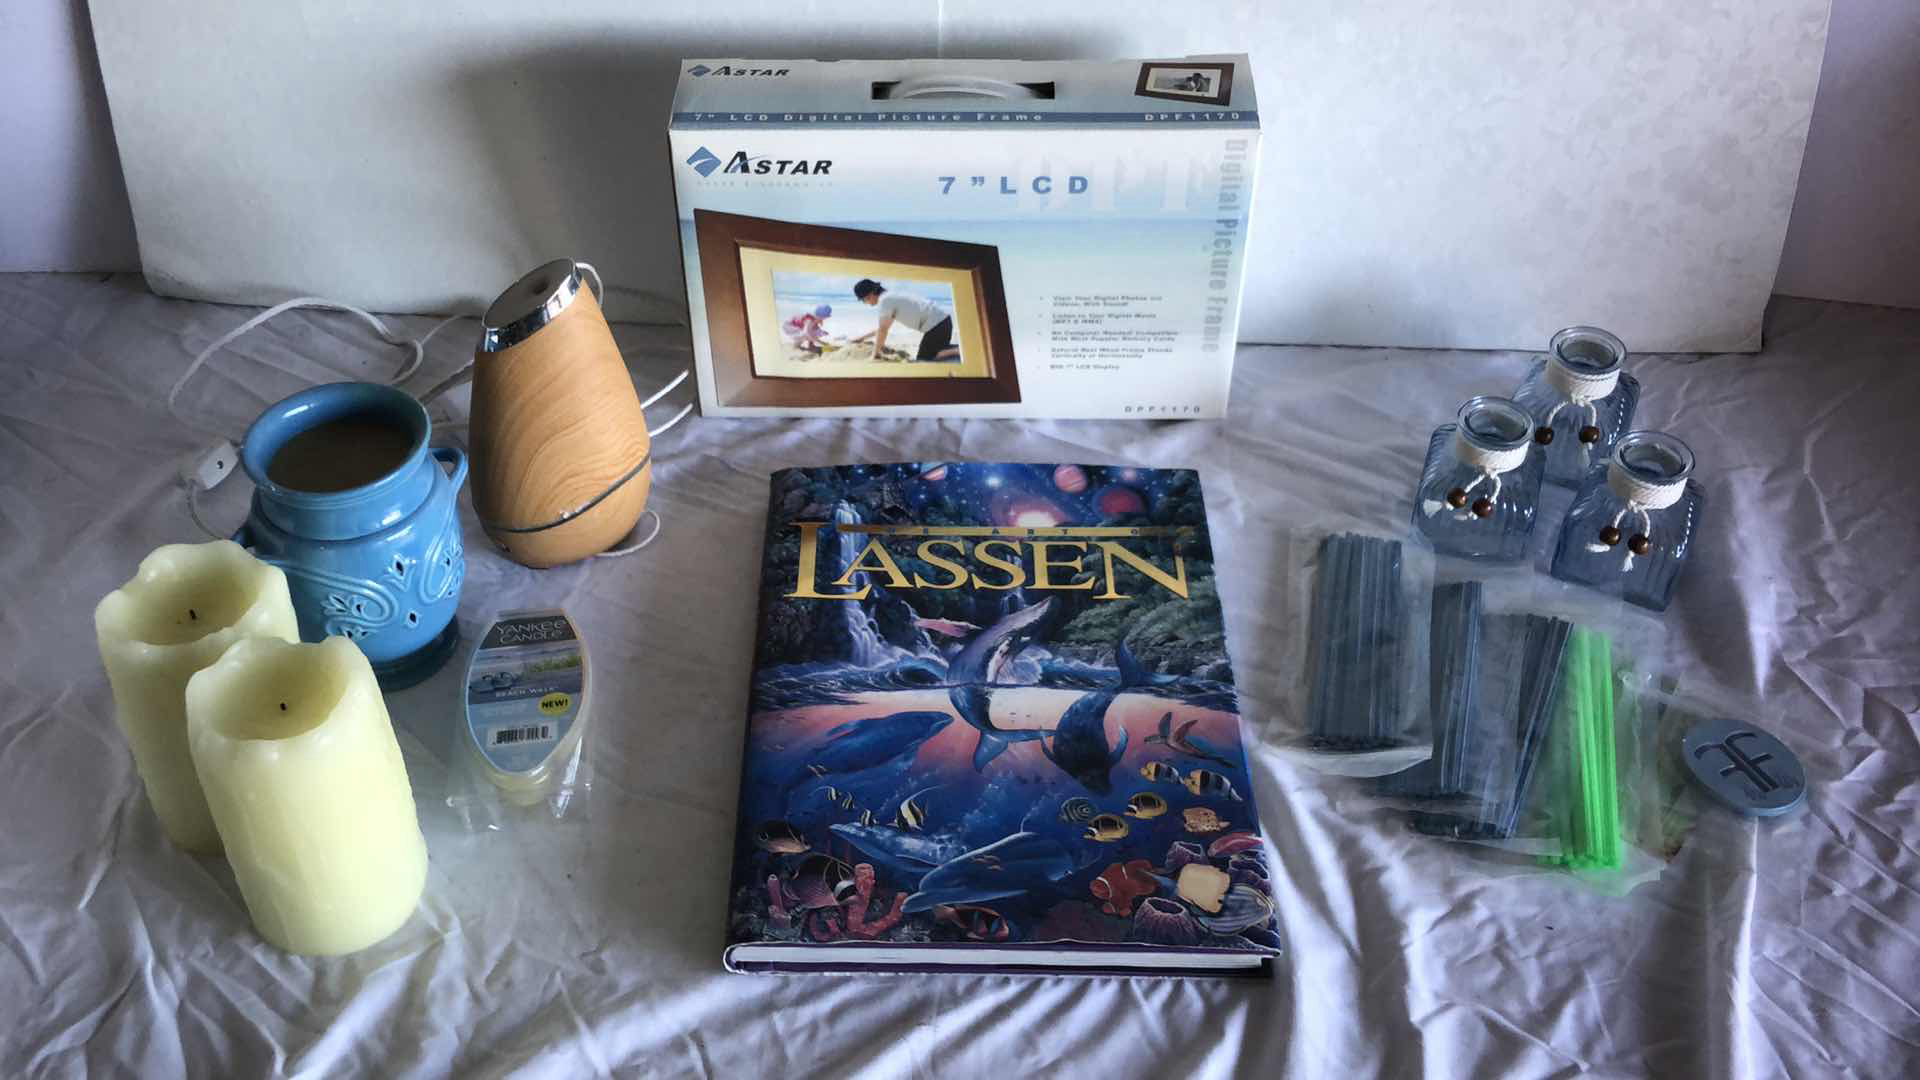 Photo 2 of FOR HER - ASTAR 7” DIGITAL PICTURE FRAME, THE ART OF LASSEN BOOK, ASSORTMENT OF HOME FRAGRANCES